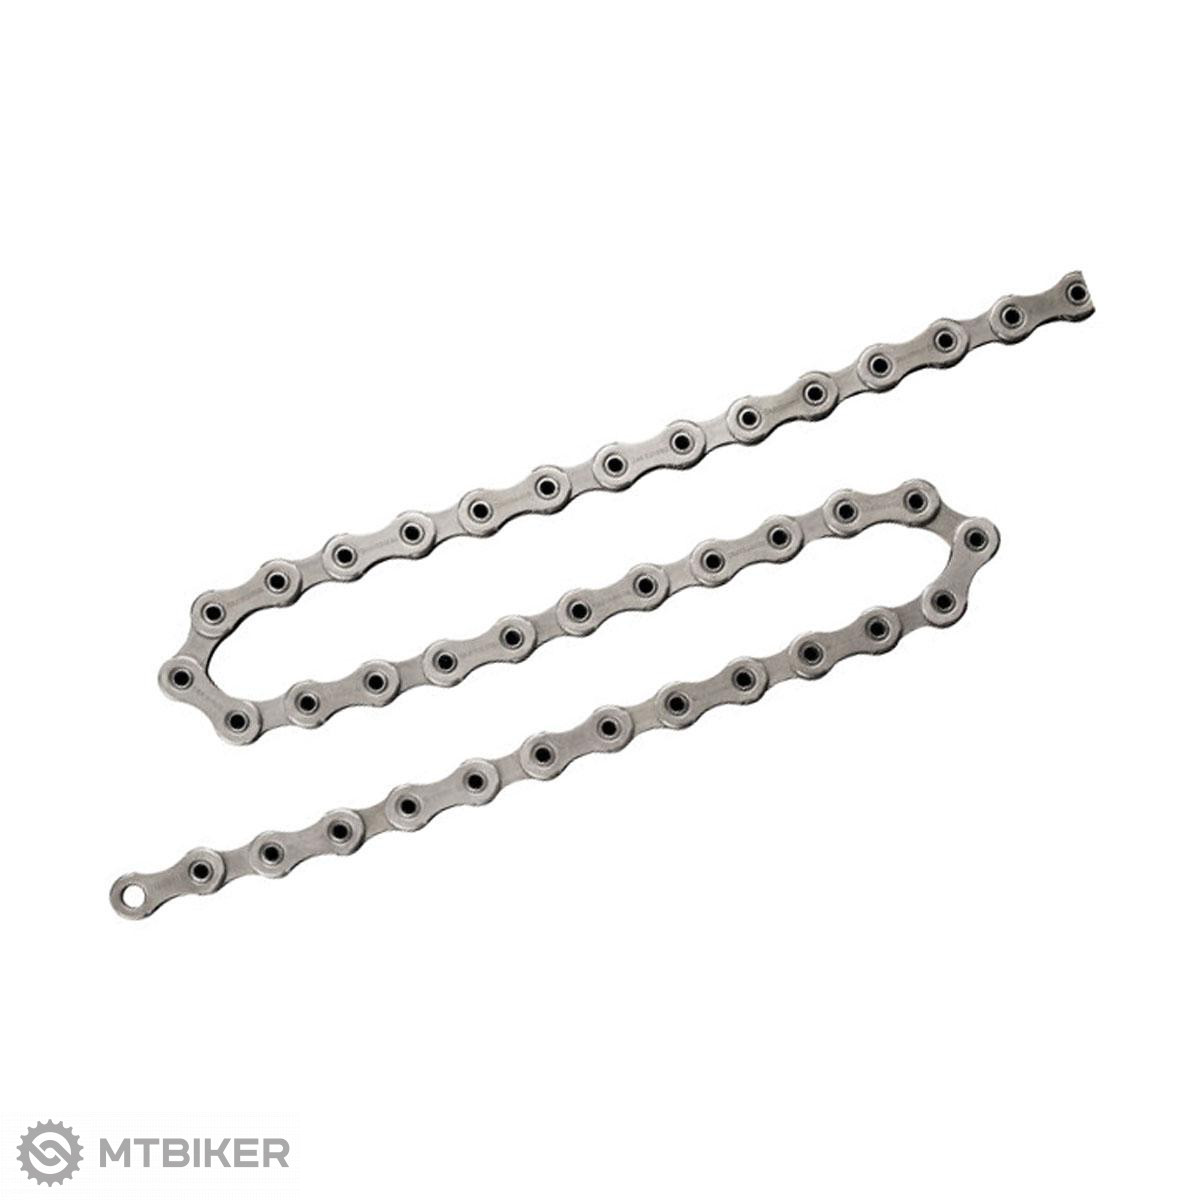 SHIMANO Chain Dura-Ace/XTR HG901 11s Quick-Link 116 links